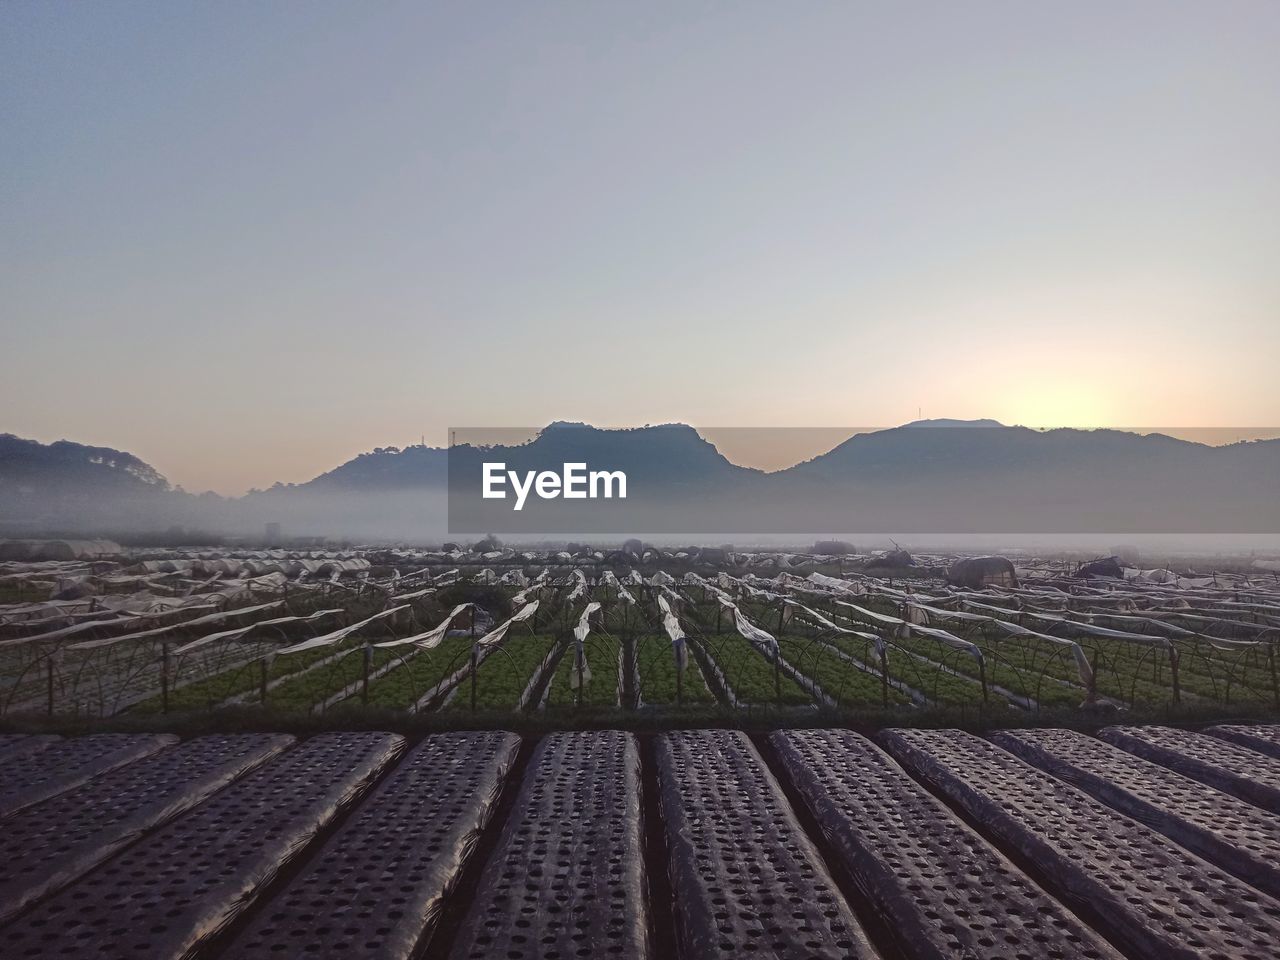 Scenic view of agricultural field against sky during sunrise